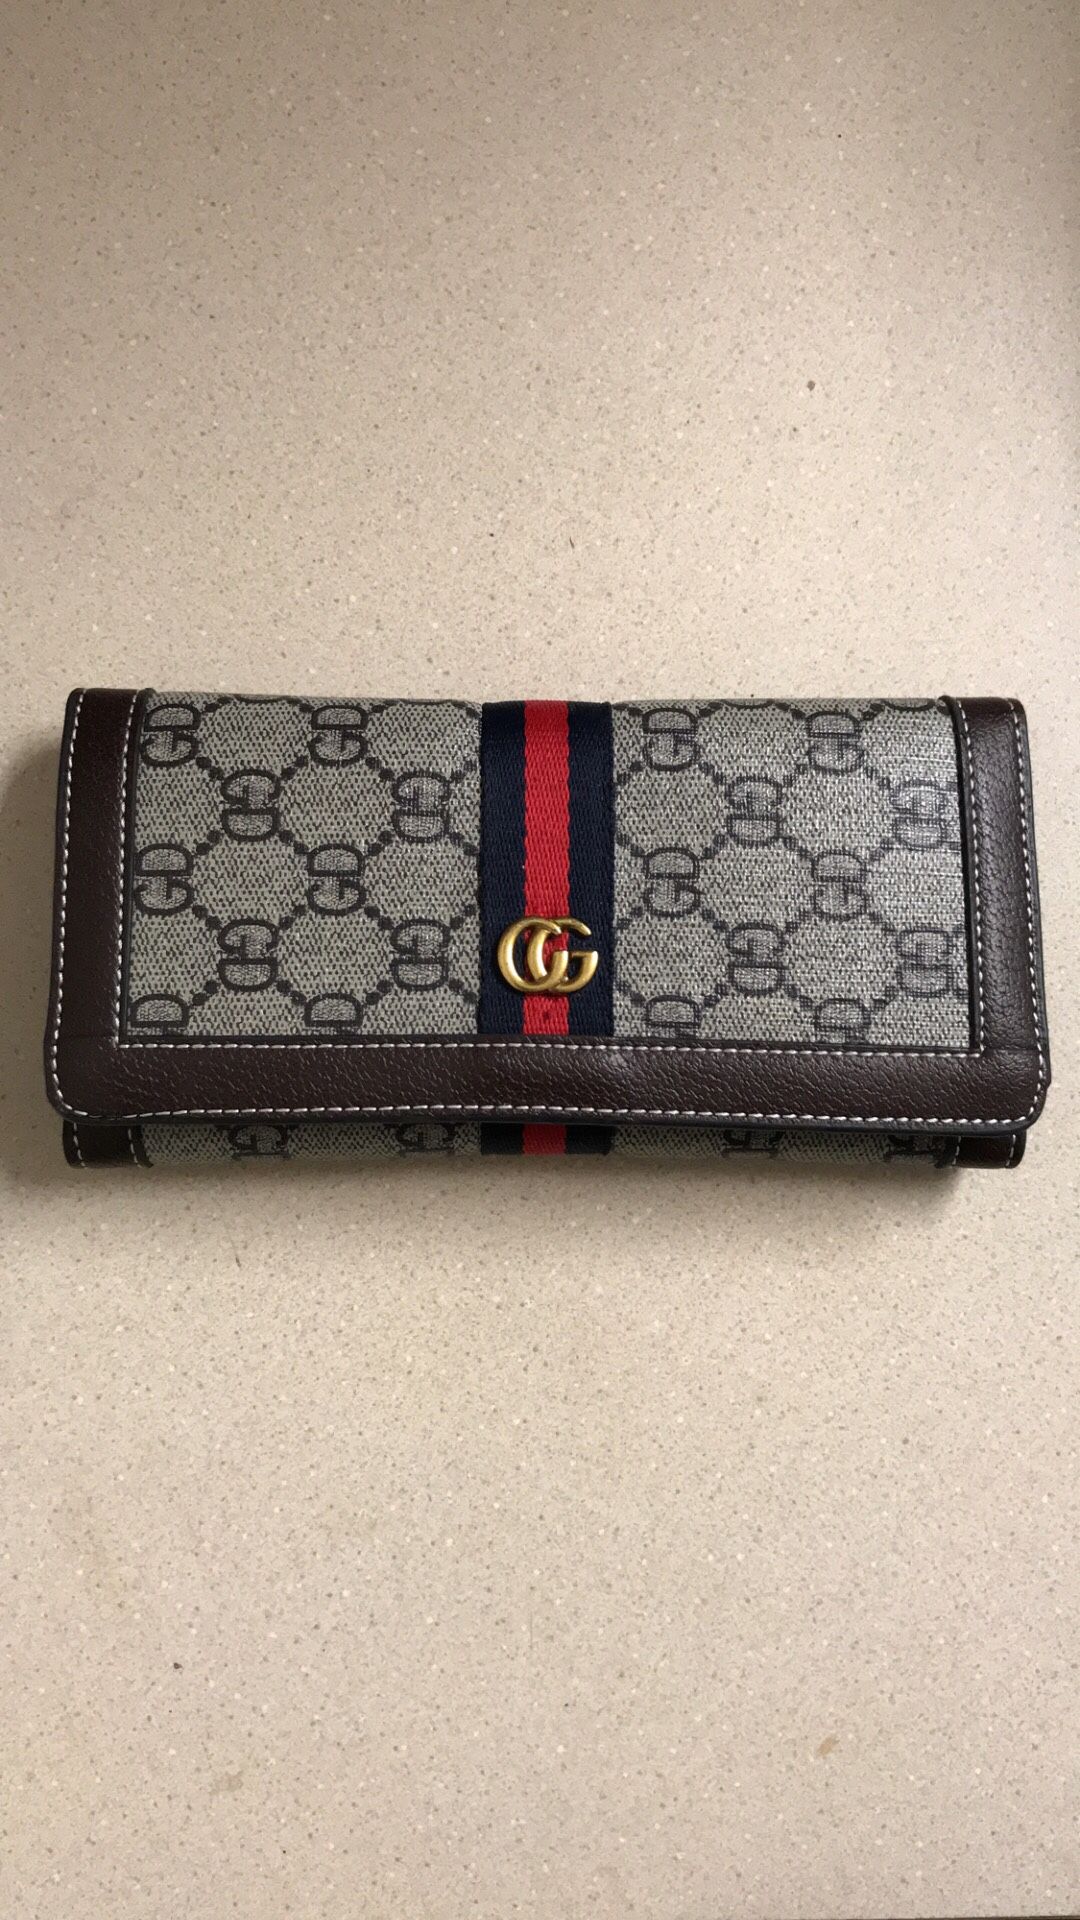 Limited Edition - GUCCI Wallet - from Shanghai, China (imitation)